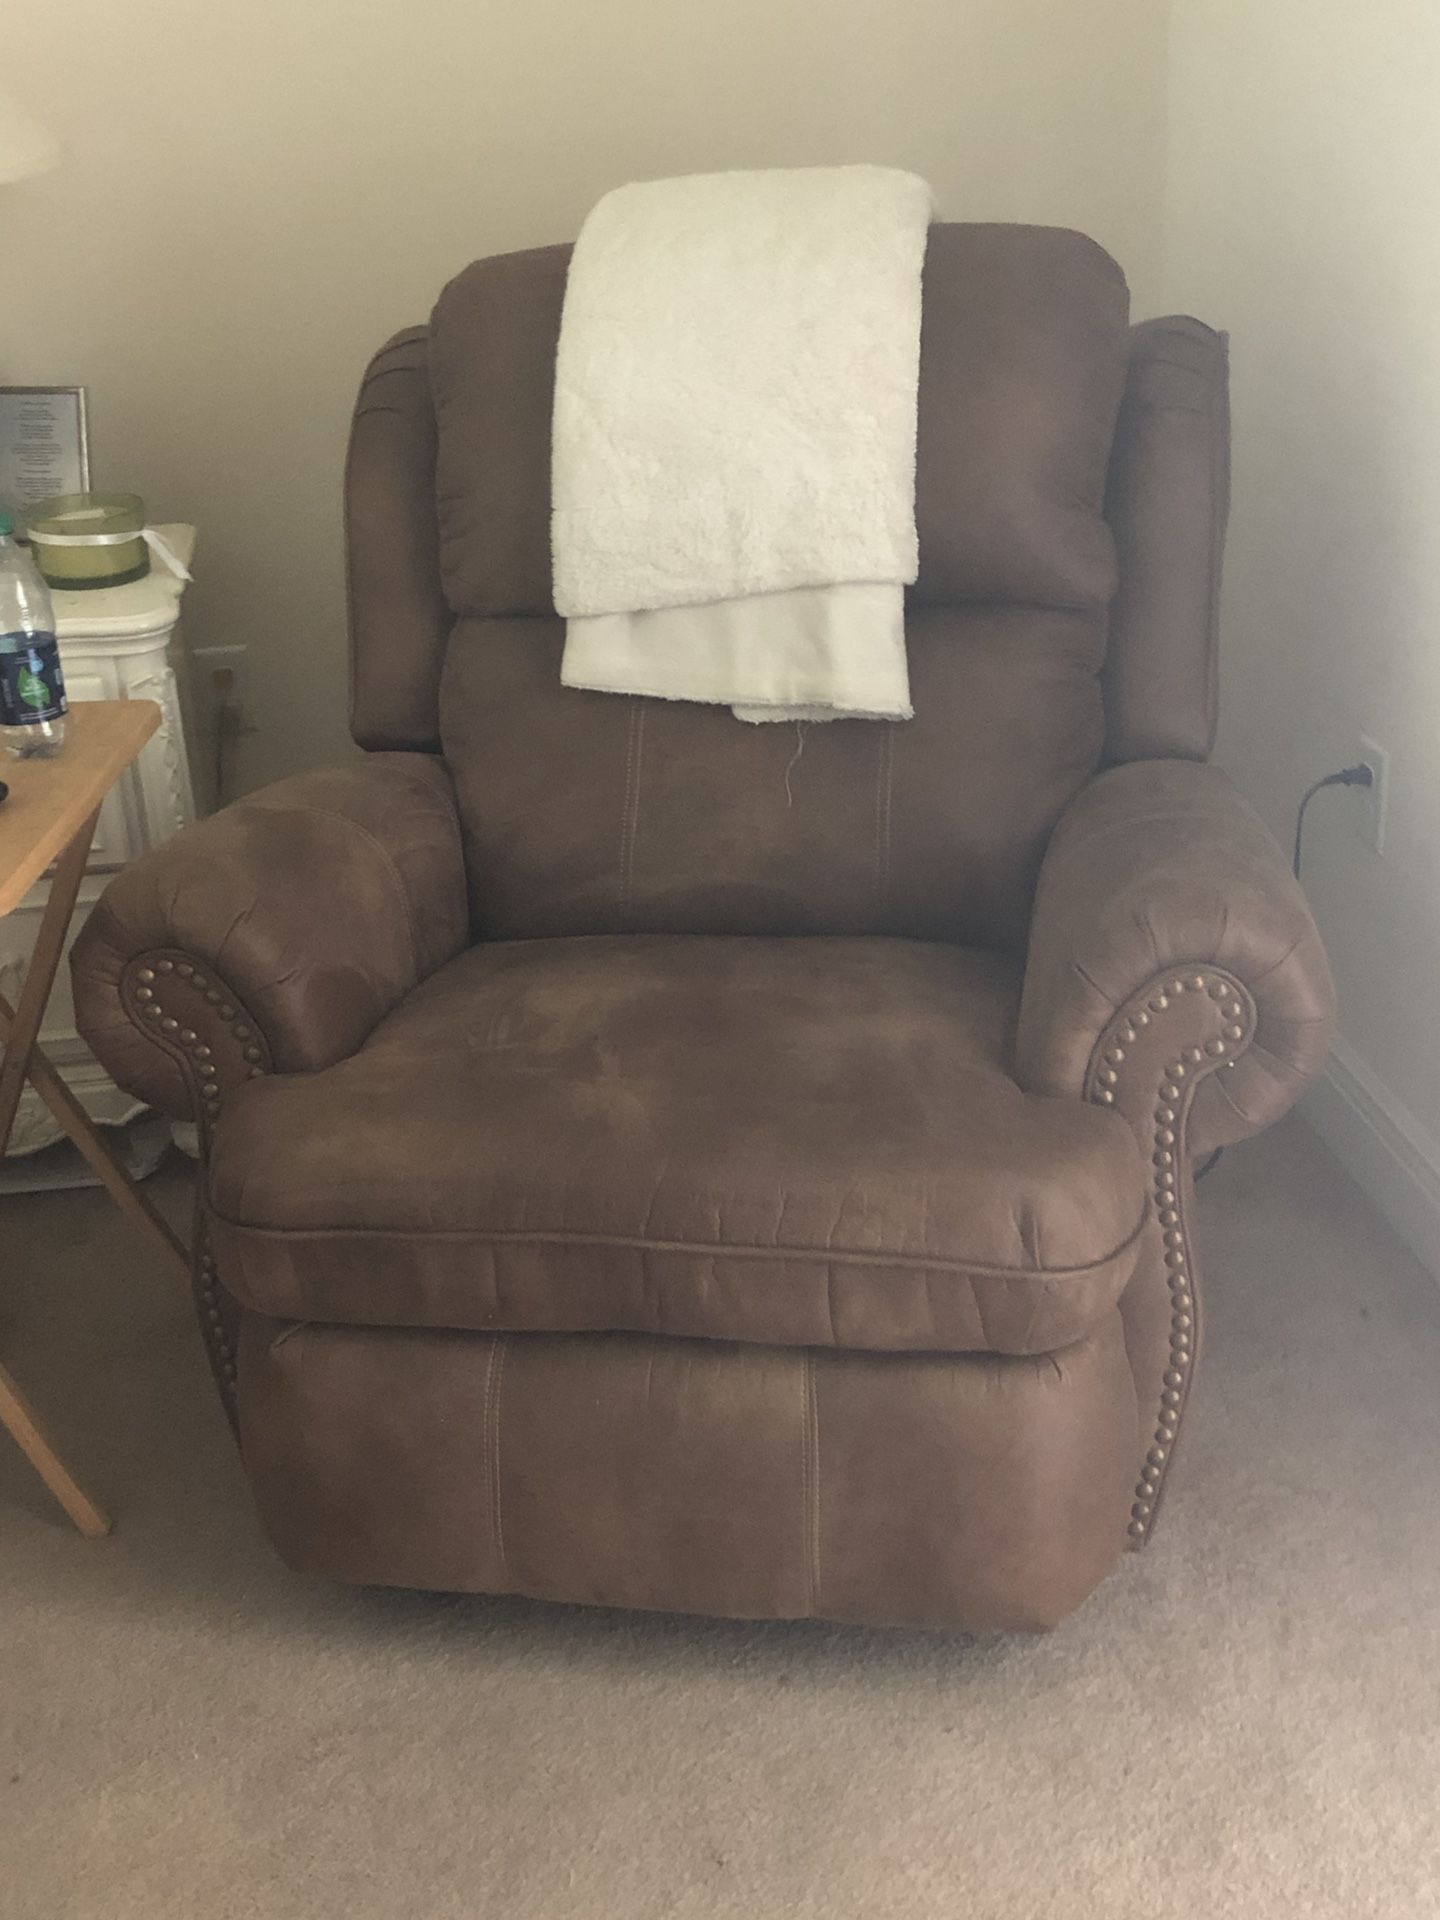 Leather electric recliner very nice in new condition!